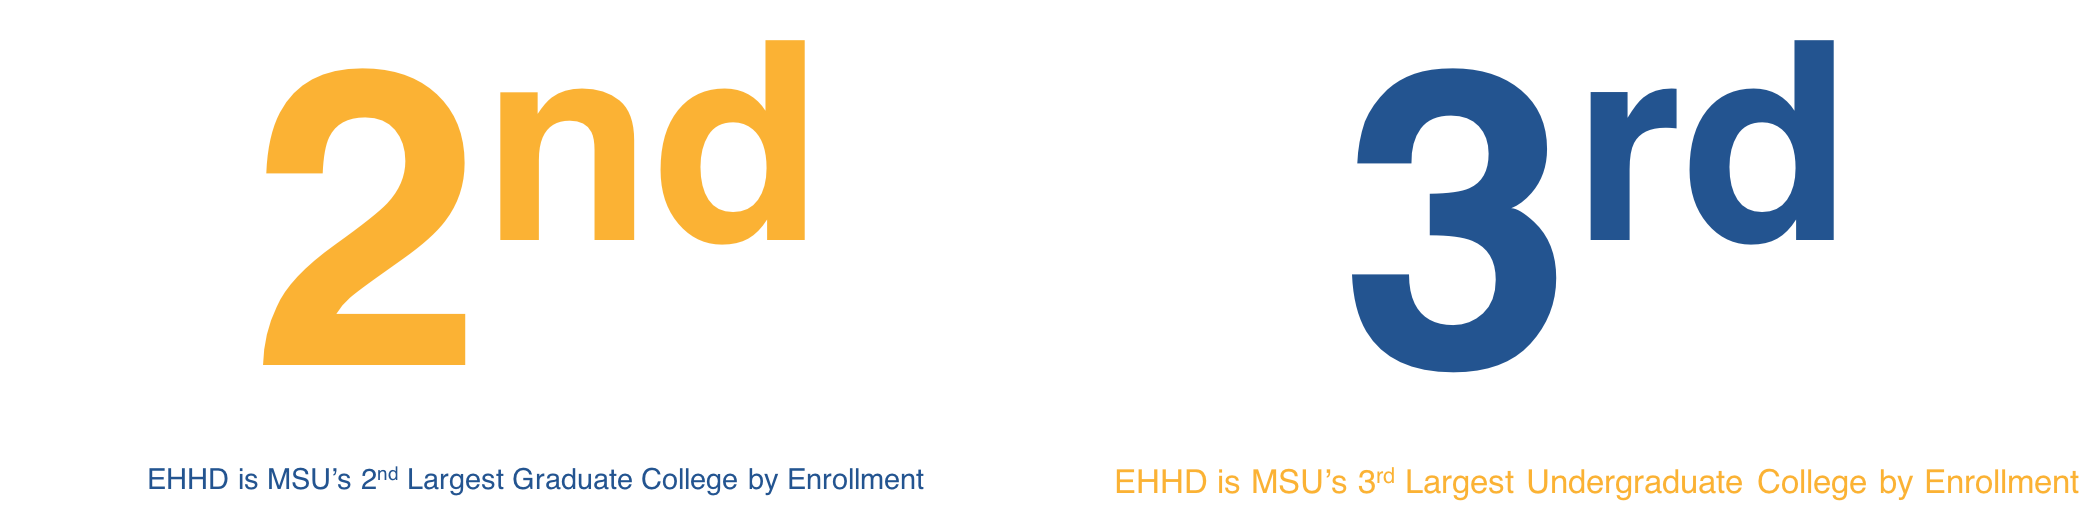 EHHD is MSUs 2nd Largest Graduate College and 3rd Largest Undergraduate College by Student Enrollment